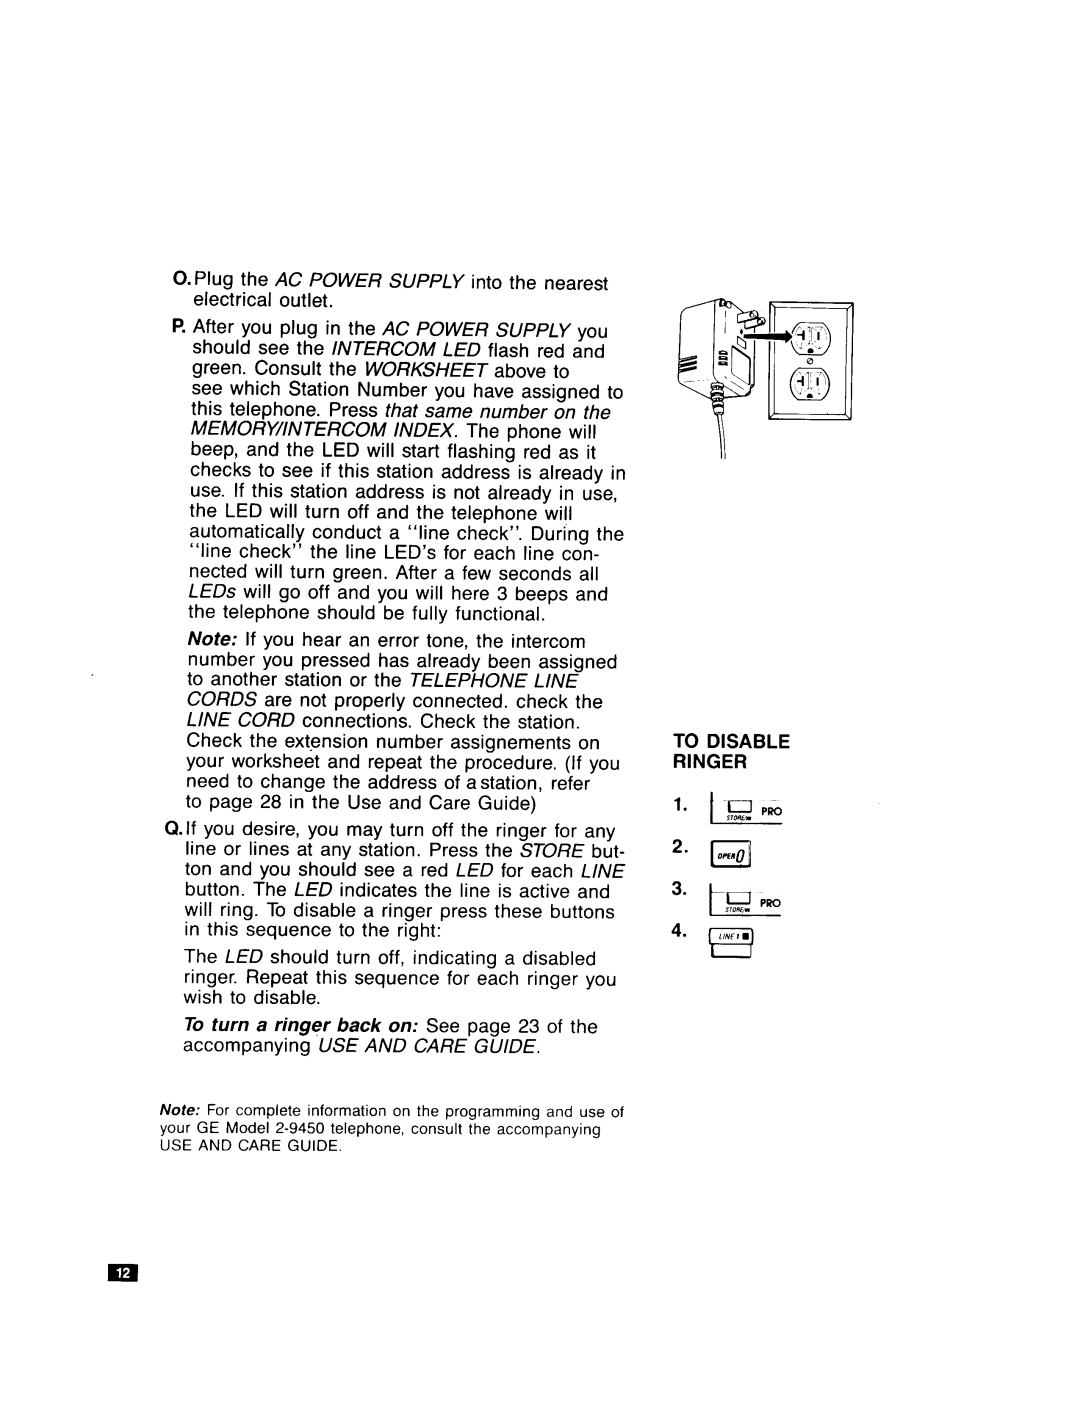 GE Feb-50 installation instructions ‘“ k, To Disable Ringer 